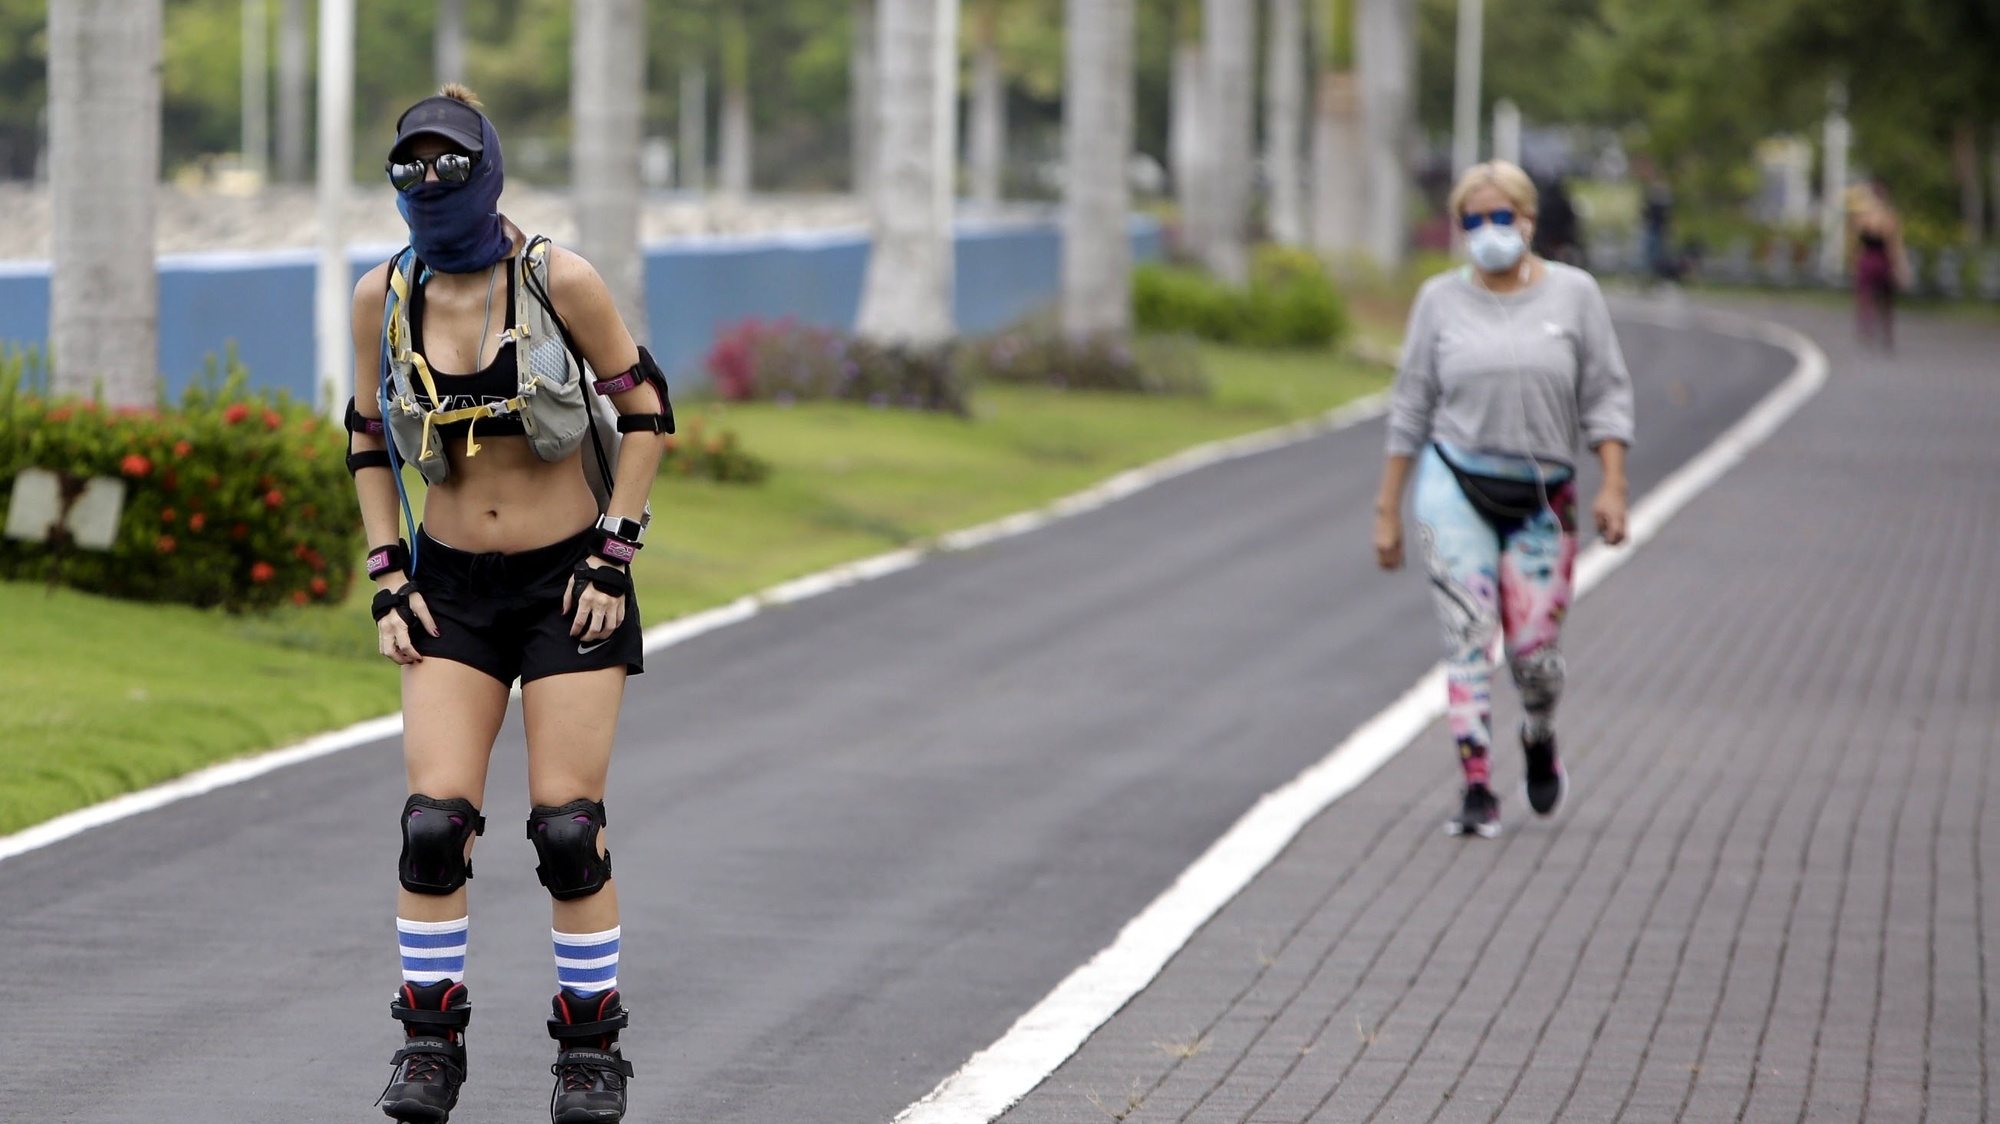 epa08430592 A woman skates in front of another who is walking on a roadway enabled for physical activity, in Panama City, Panama, 18 May 2020. The health authorities are beginning to relax the quarantine measures for the return to the new normality of the citizens, who from this Monday will be able to exercise individually in the open air, as long as they maintain the use of masks and social distancing. Panamanians will have only one kilometer of perimeter from their homes for said activity, the corresponding day according to the time and the numbering of their ID.  EPA/Carlos Lemos